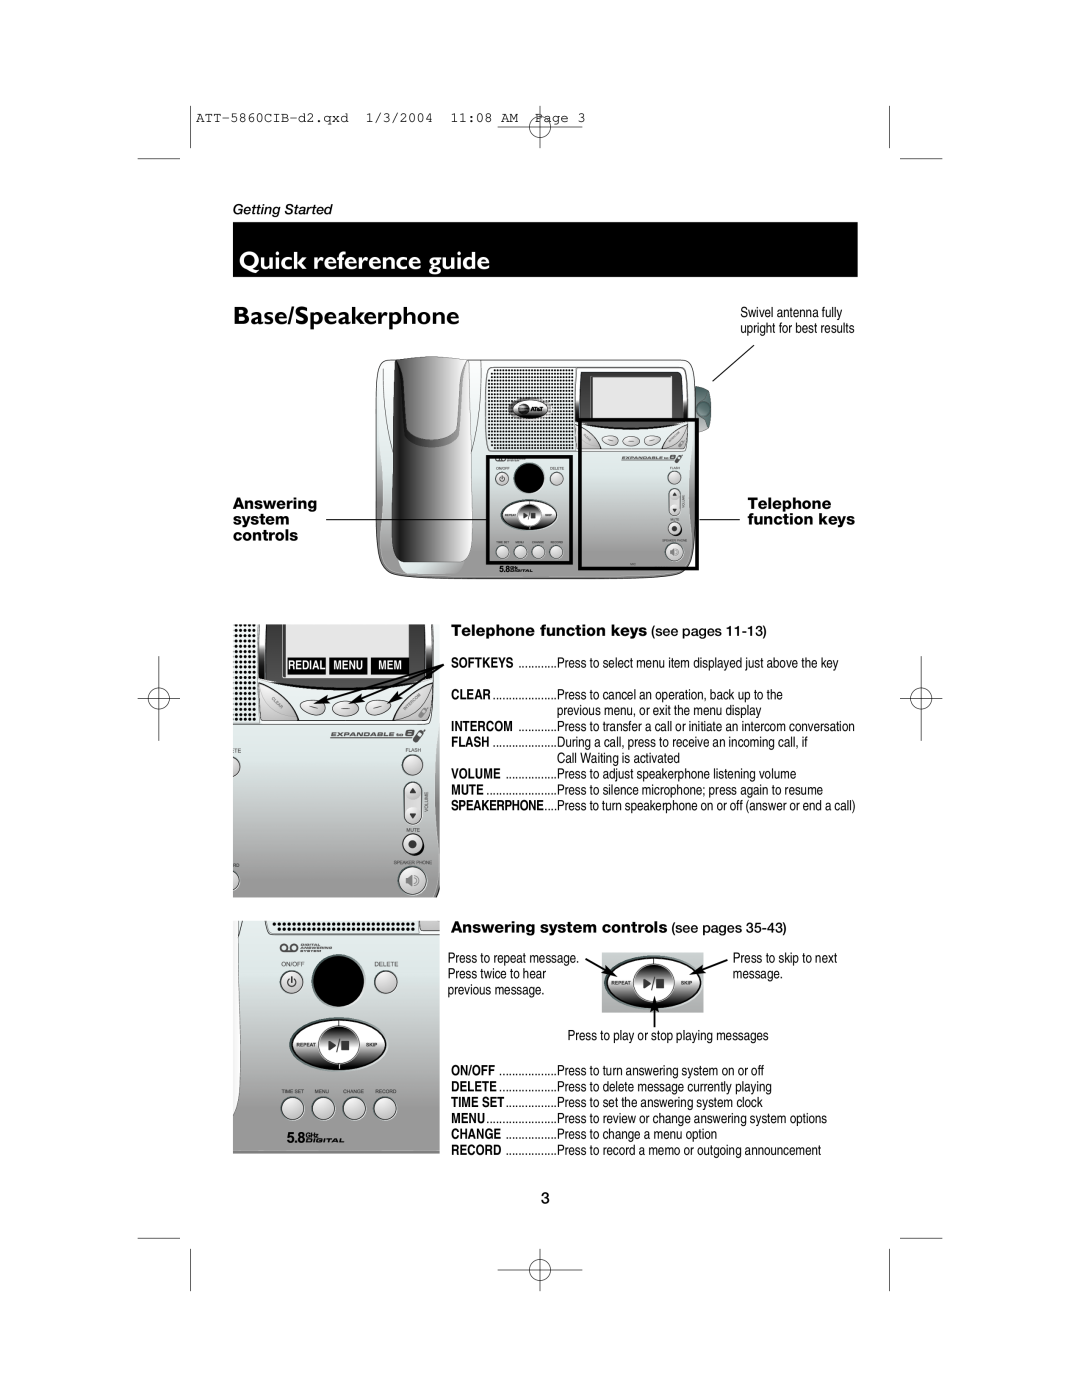 AT&T E5860 user manual Base/Speakerphone, Quick reference guide, ATT-5860CIB-d2.qxd 1/3/2004 1108 AM Page, Getting Started 